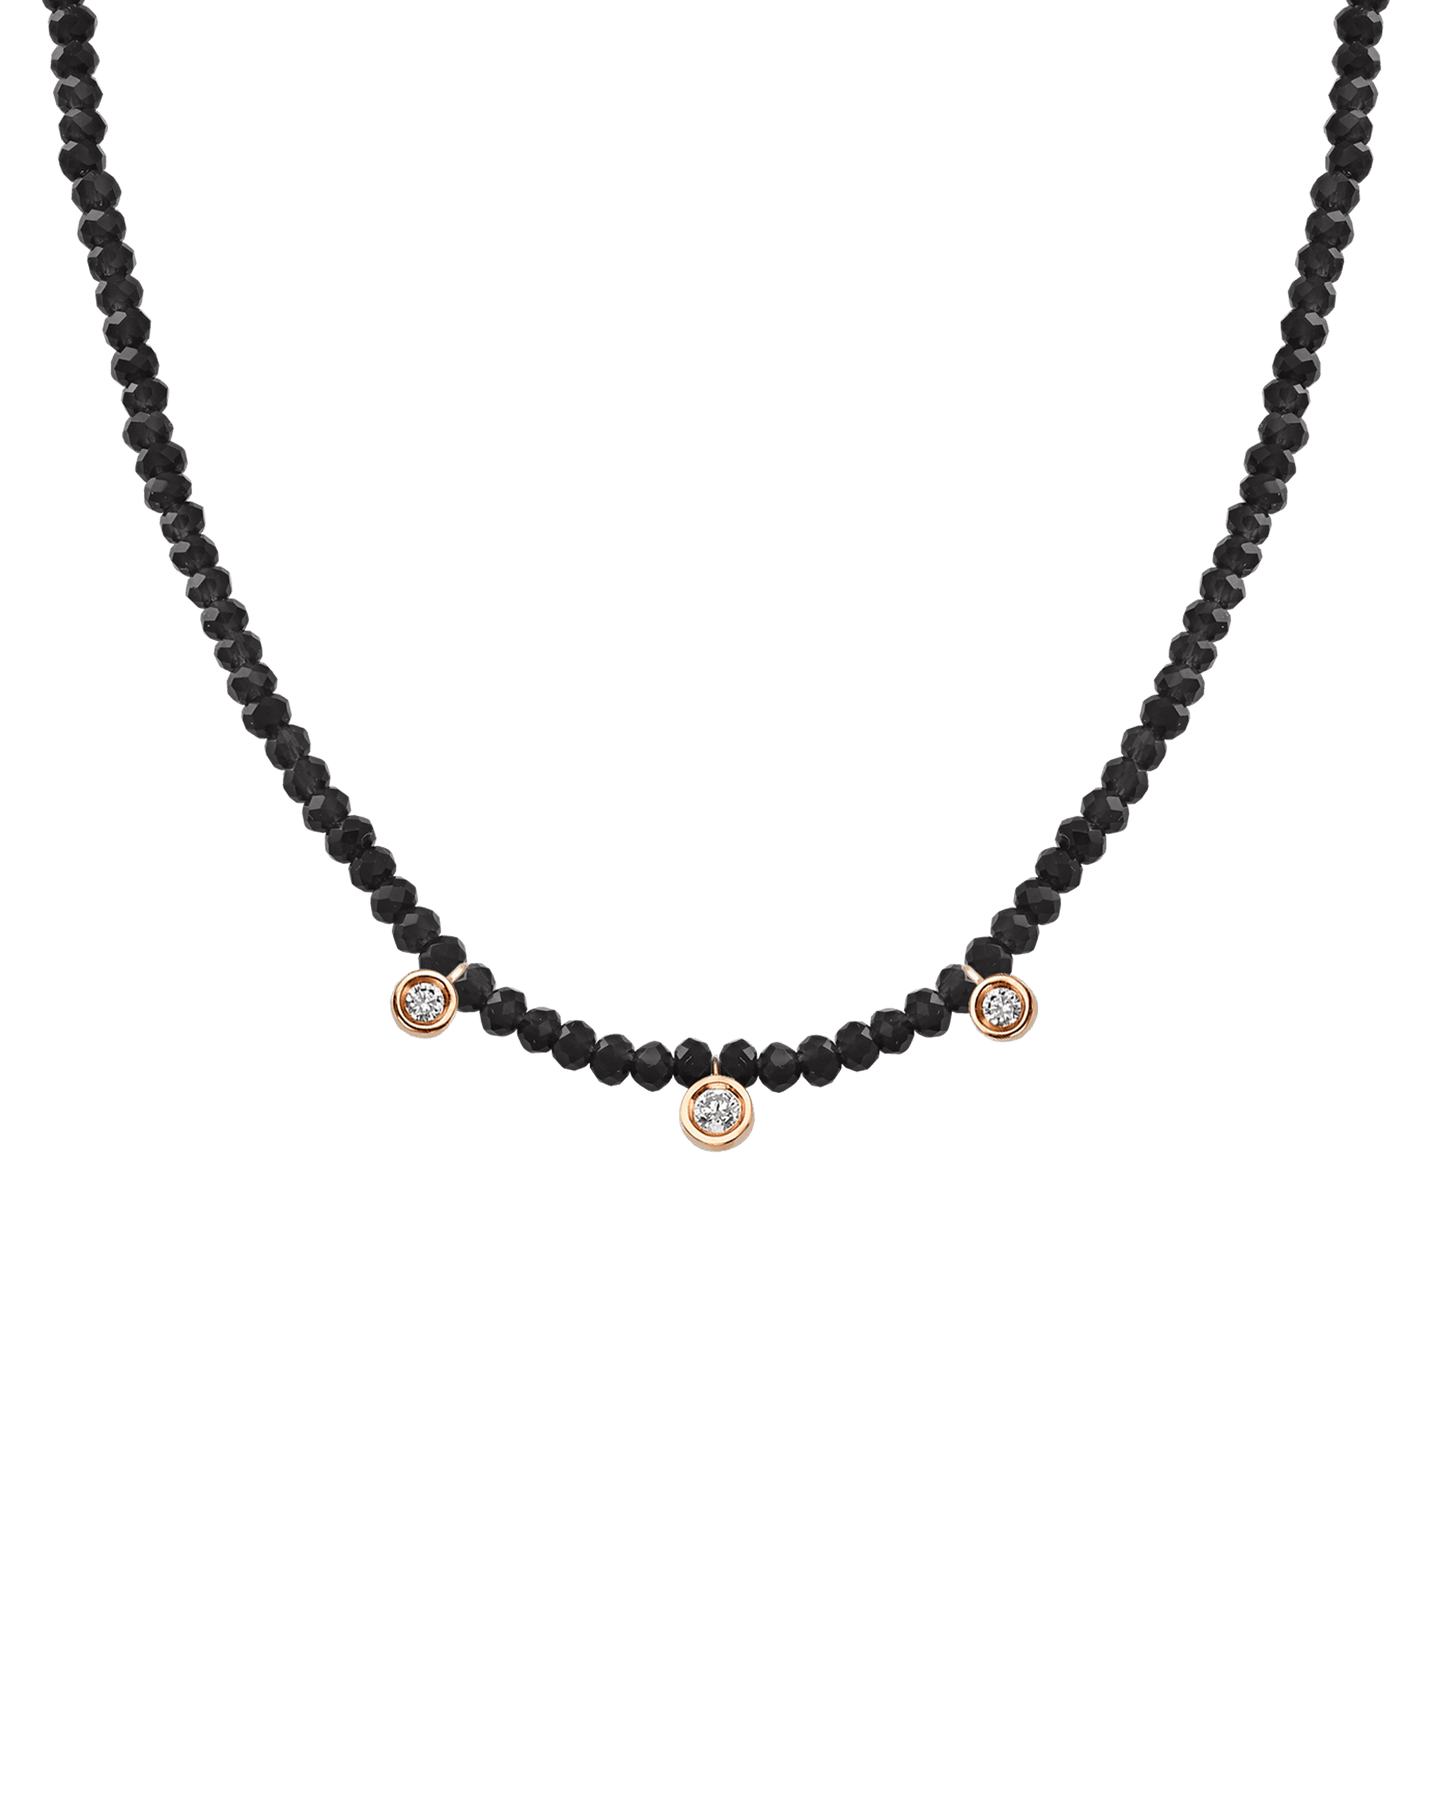 Emerald Gemstone & Three diamonds Necklace - 14K Rose Gold Necklaces magal-dev Glass Beads Black Spinnel 14" - Collar 